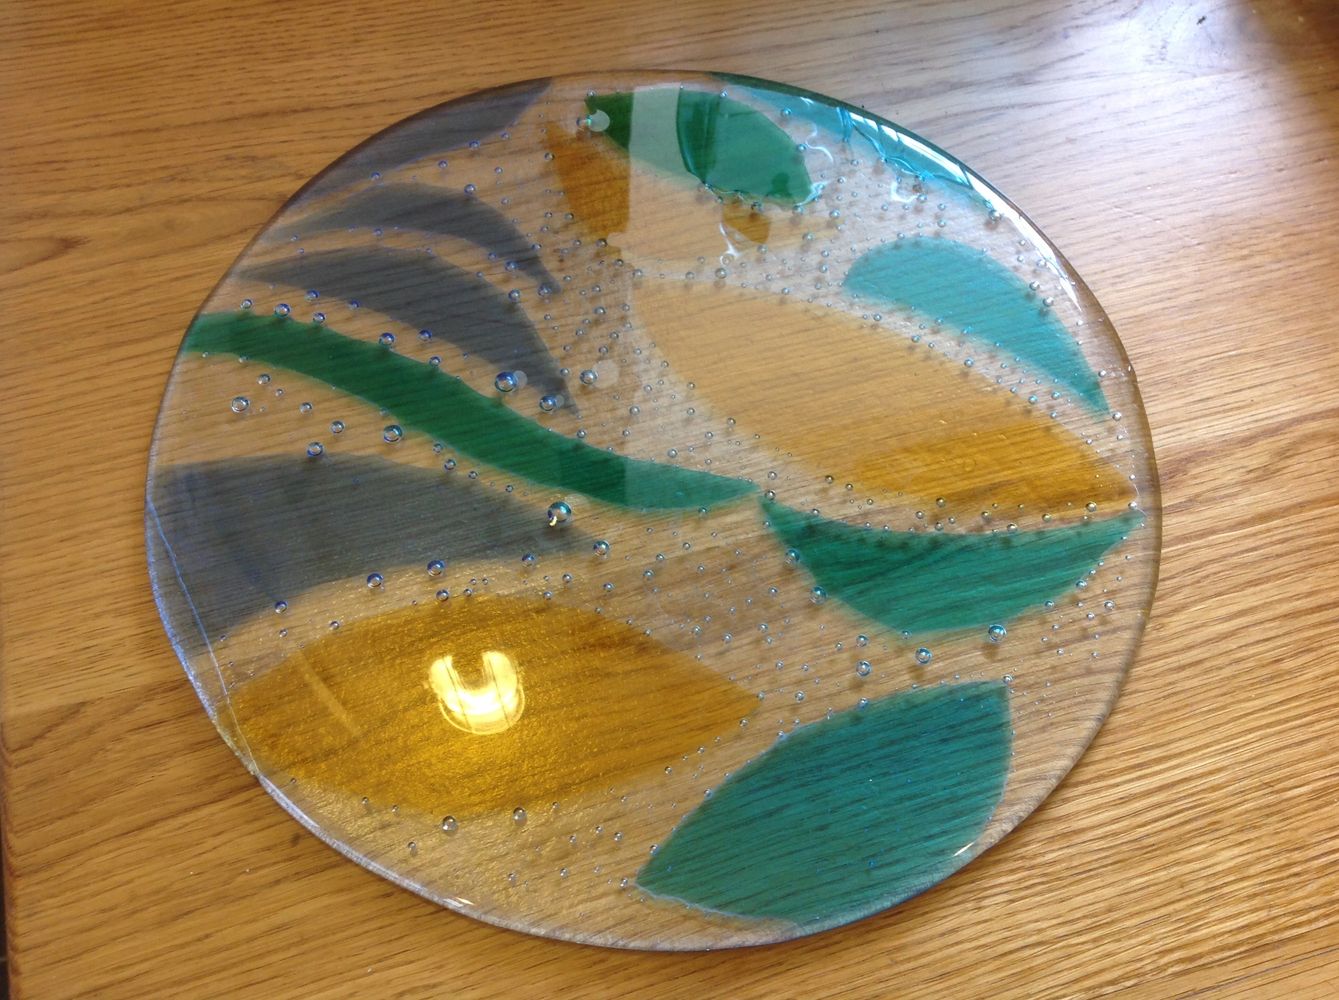 Bowl with green and yellow leaves